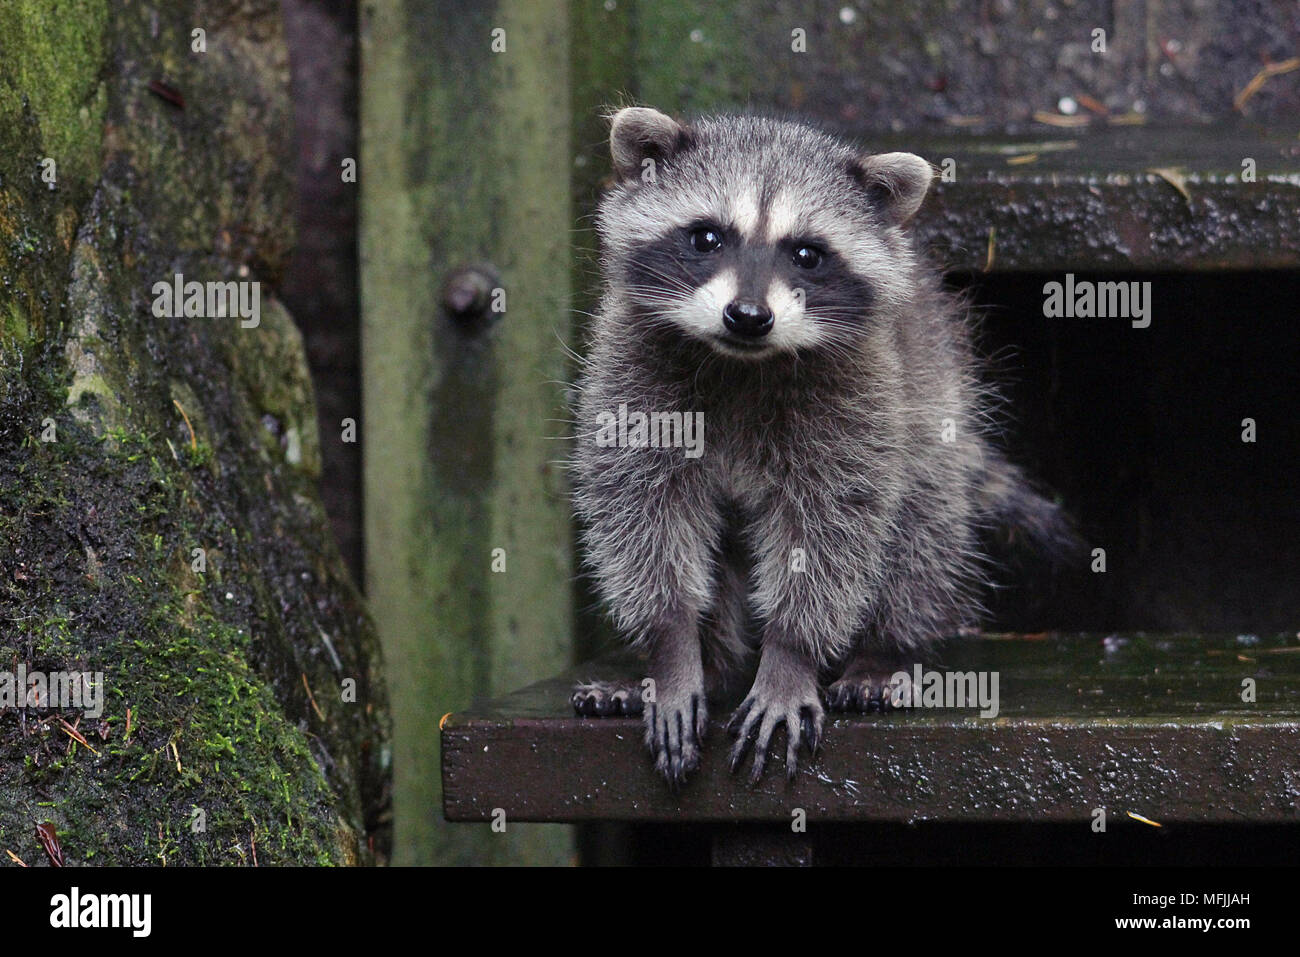 Baby raccoon (Procyon lotor) sitting on a step in a back yard in Nanaimo, British Columbia. Stock Photo